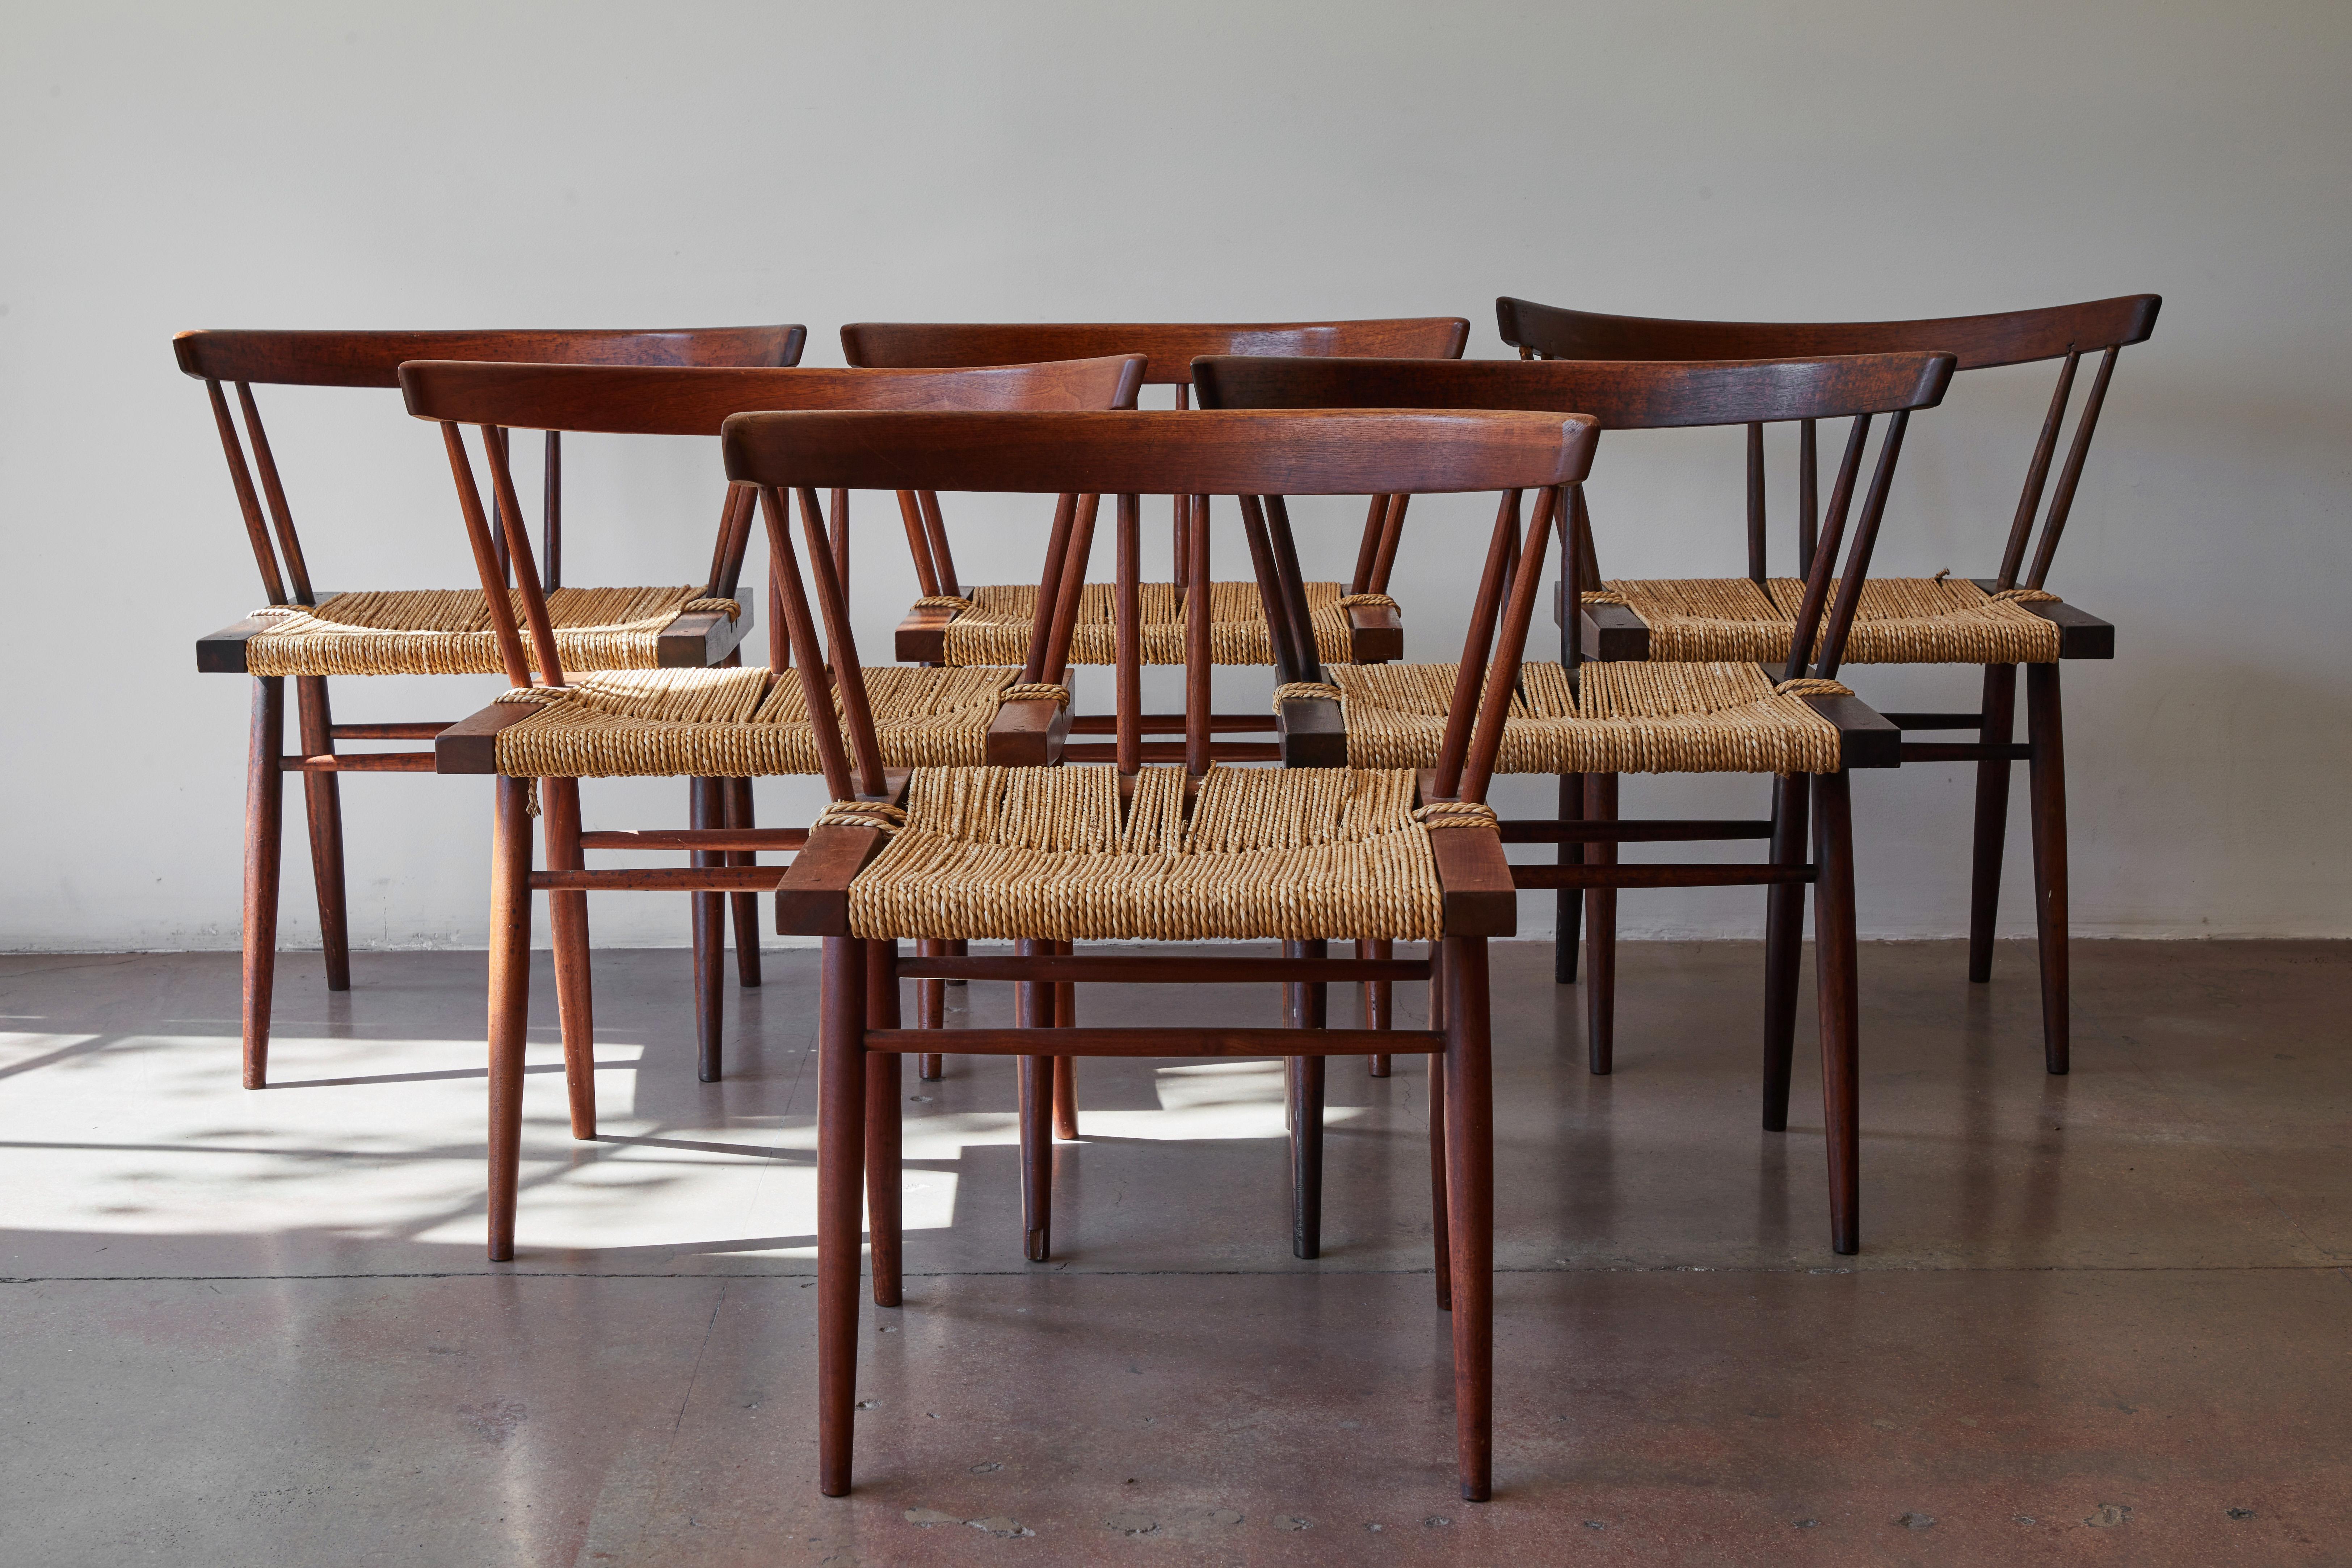 Set of six George Nakashima chairs in cherry and black walnut wood with woven seagrass seats. Made in New Hope, Pennsylvania circa 1950s.